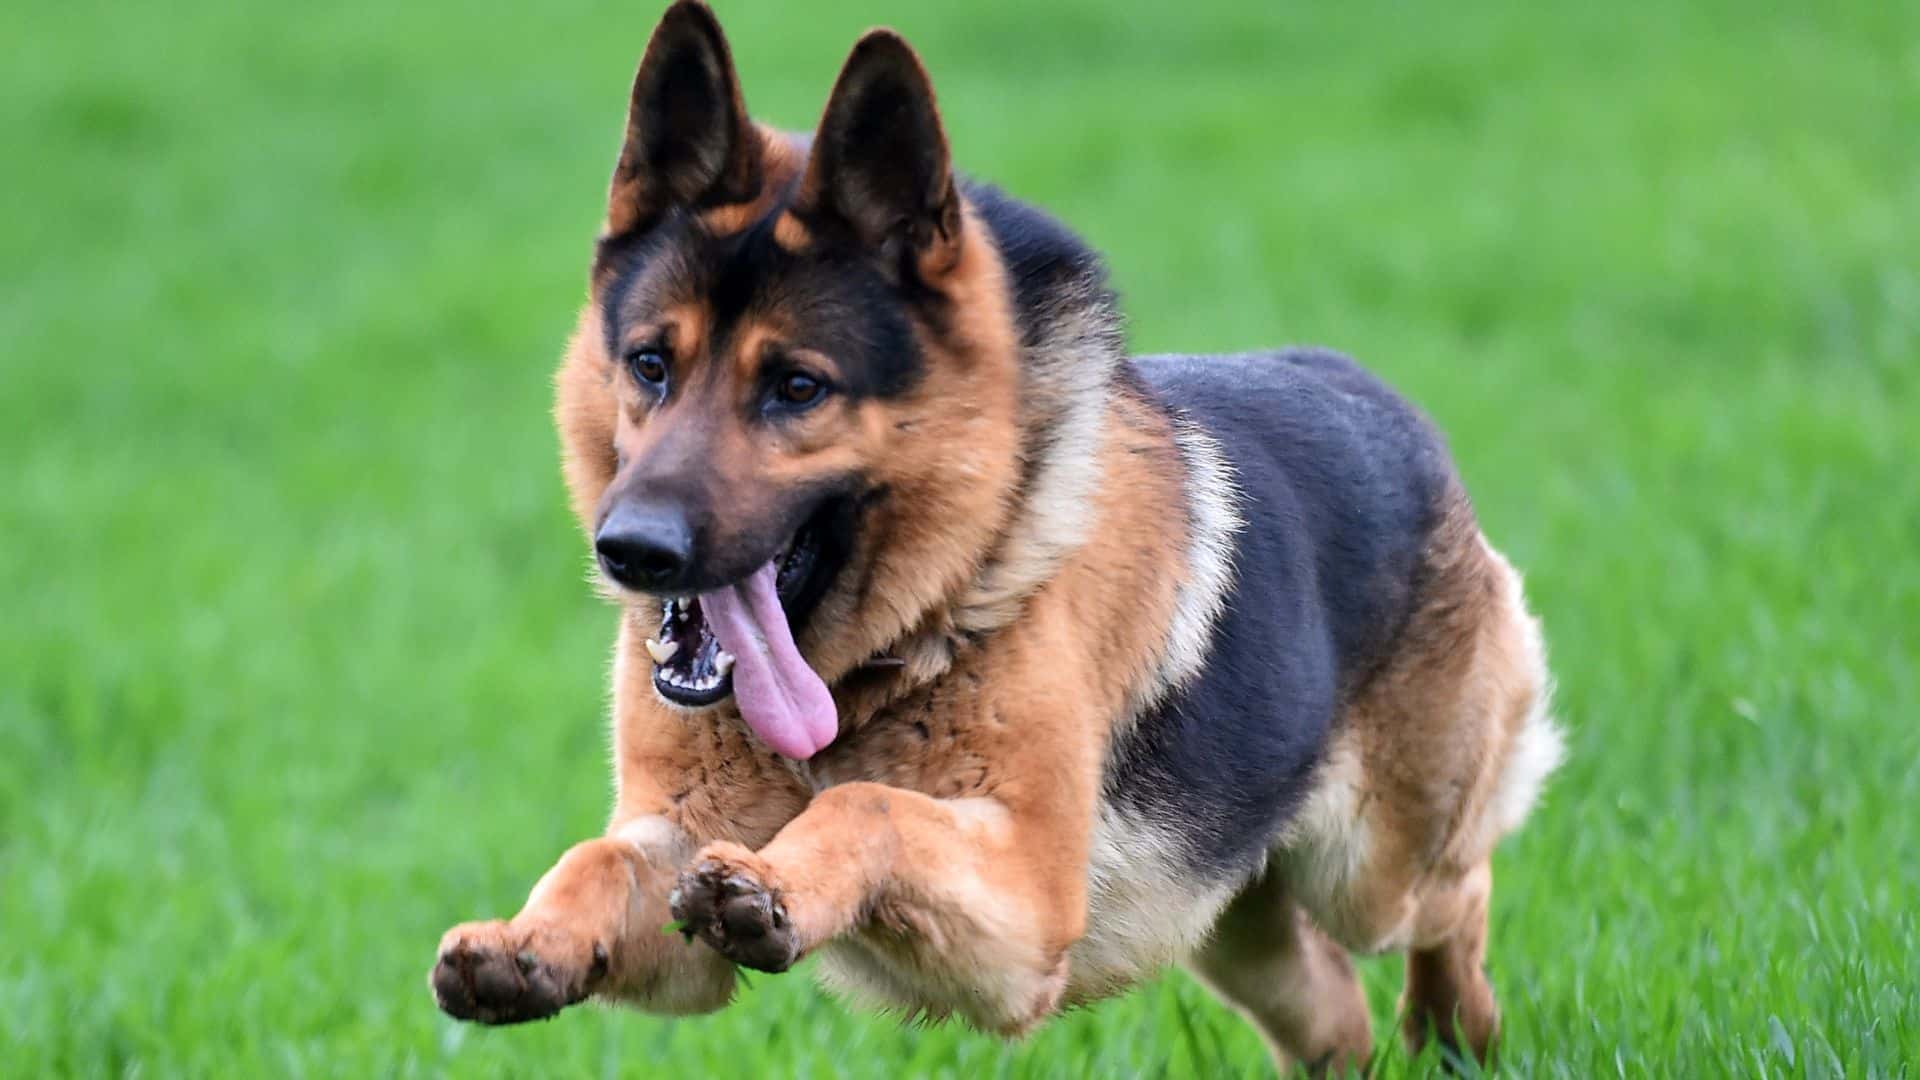 German shepherd speed makes them one of the fastest breed